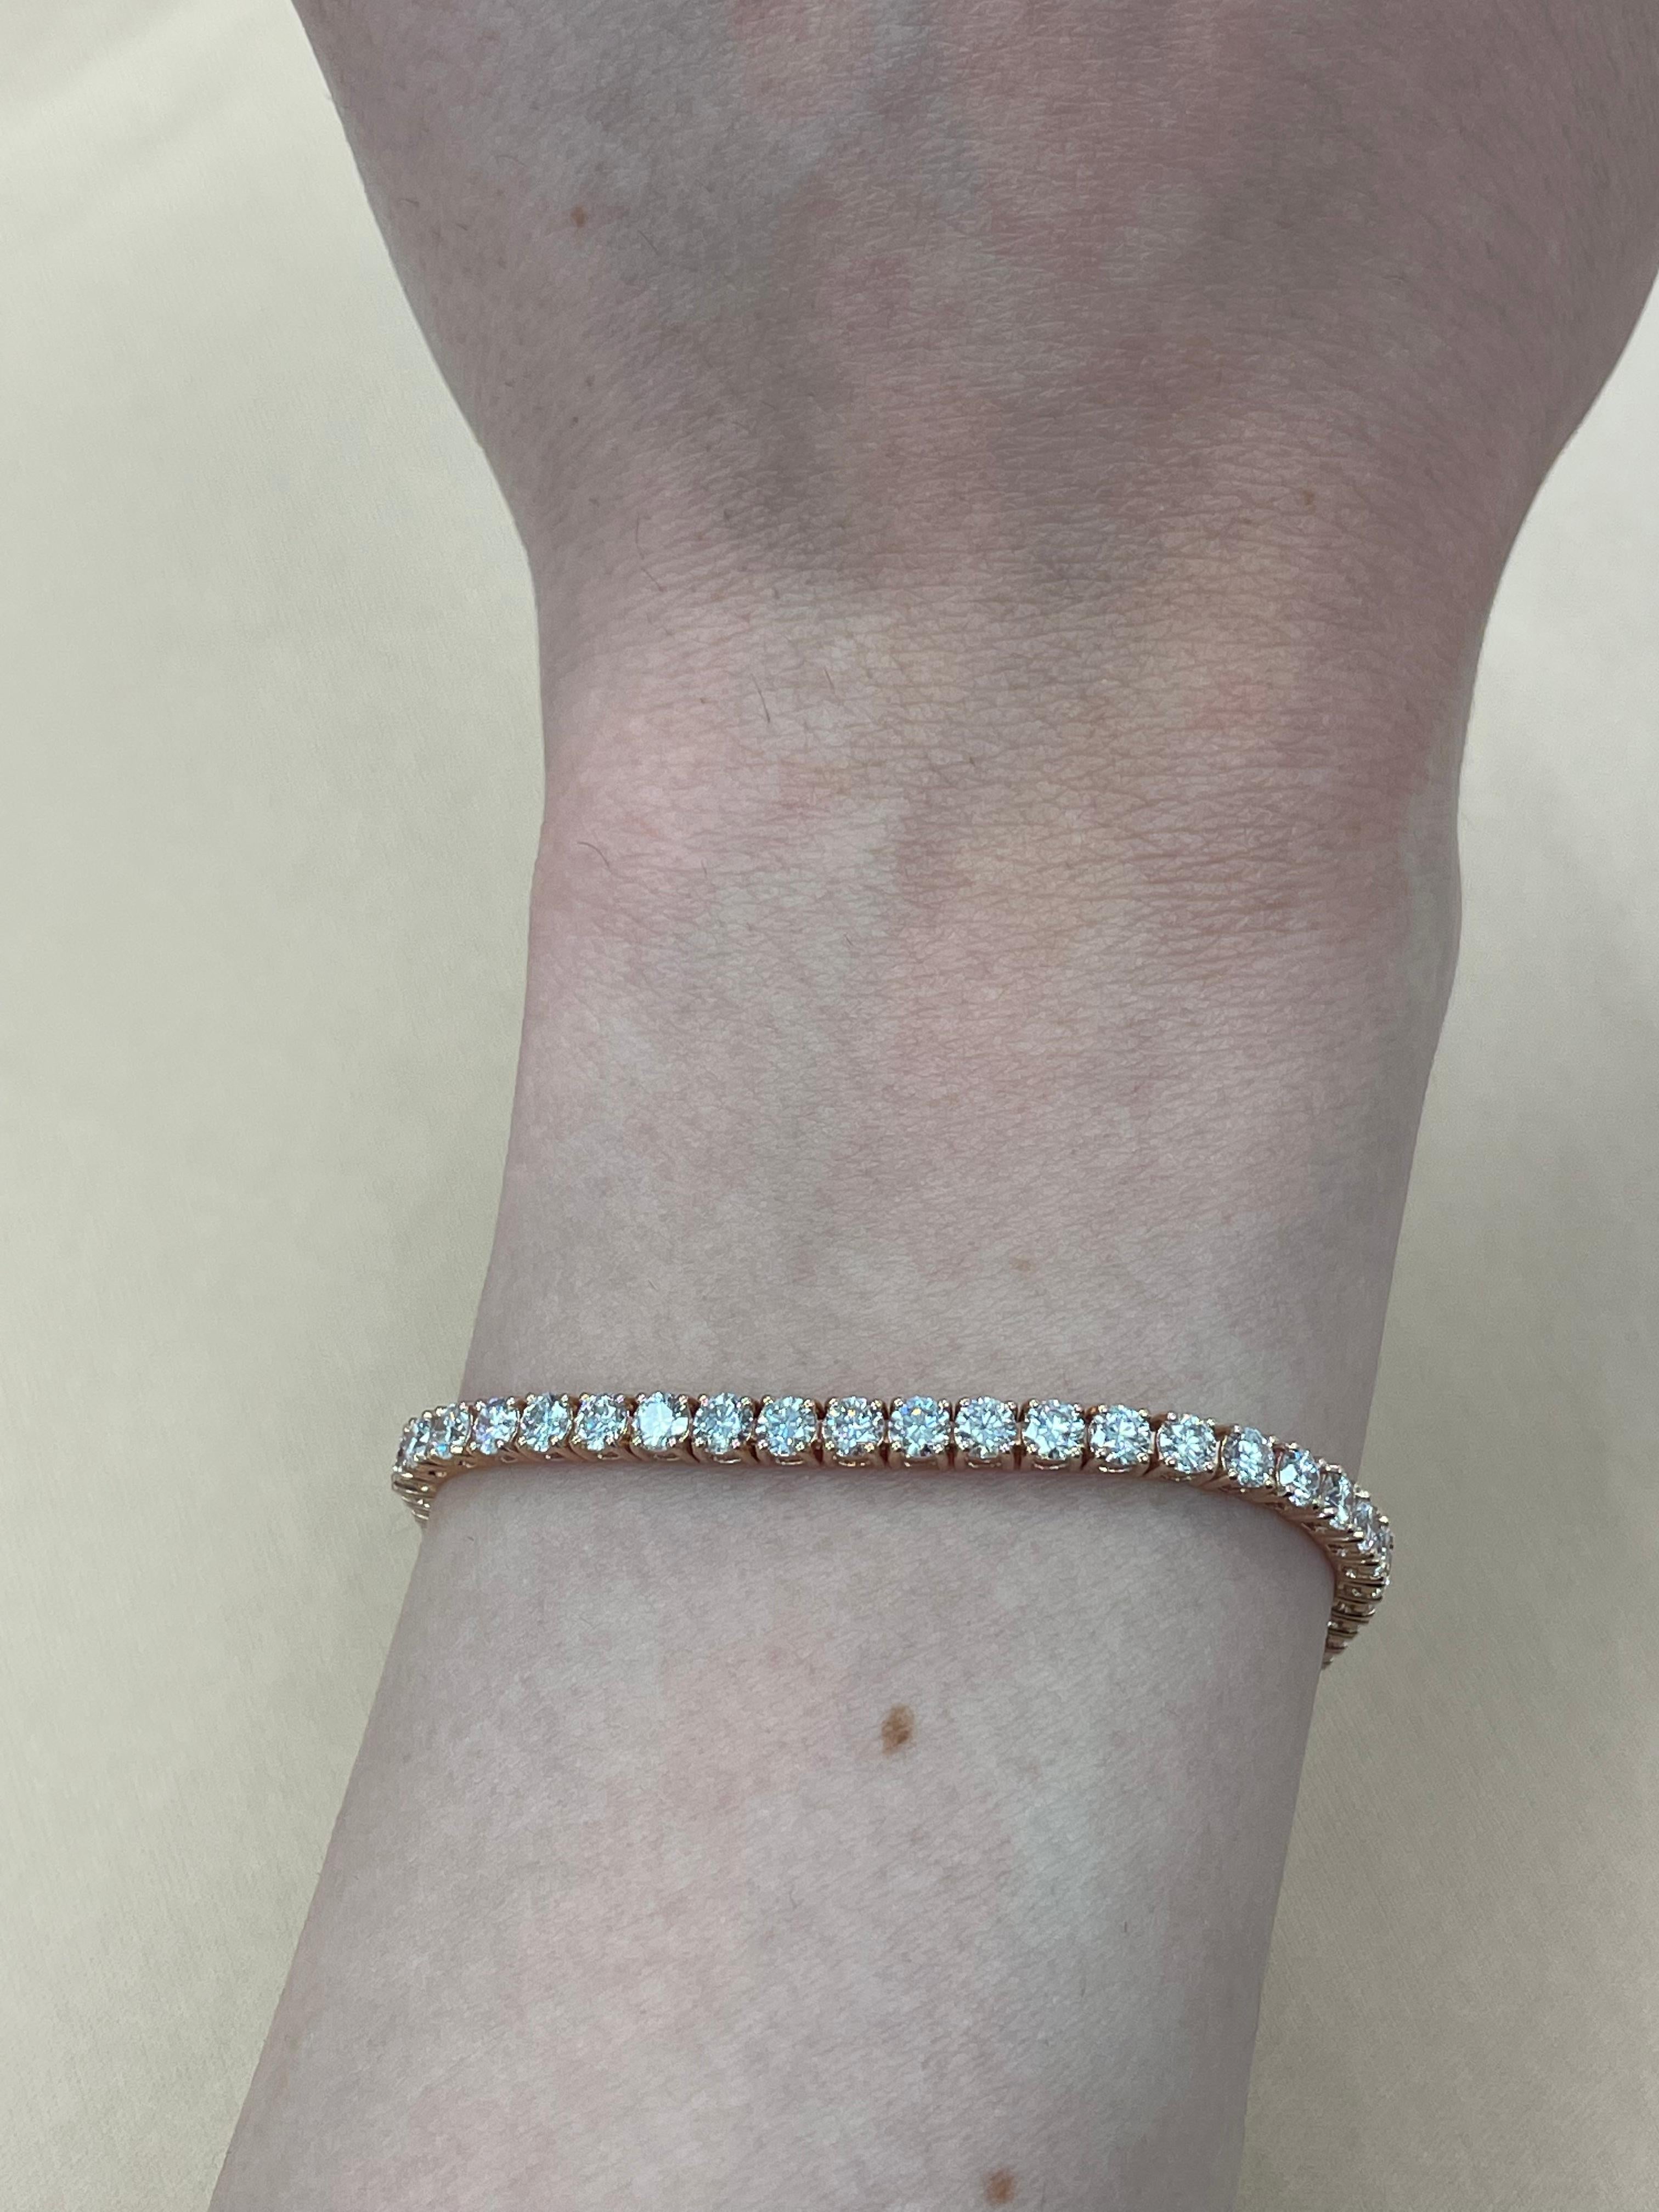 Exquisite and timeless diamonds tennis bracelet, by Alexander Beverly Hills.
57 round brilliant diamonds, 5.63 carats total. Approximately Very Light Pink color (looks like regular white diamonds in mounting) and VS2/SI1 clarity. Four prong set in